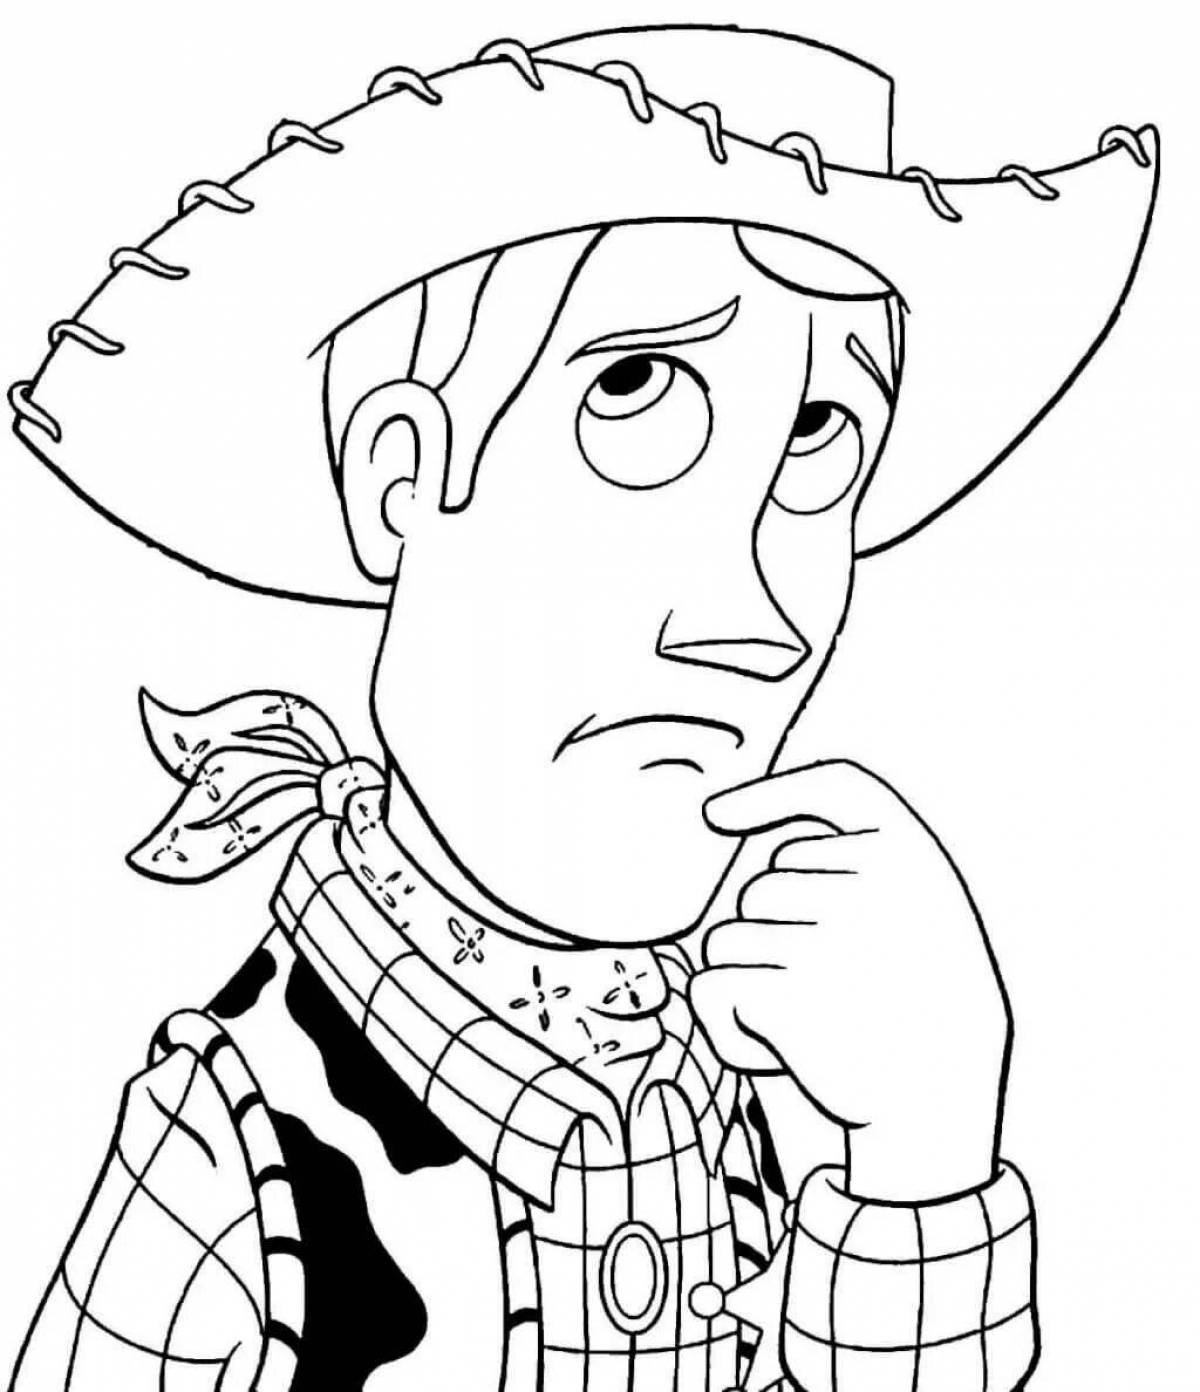 Charming sheriff coloring page